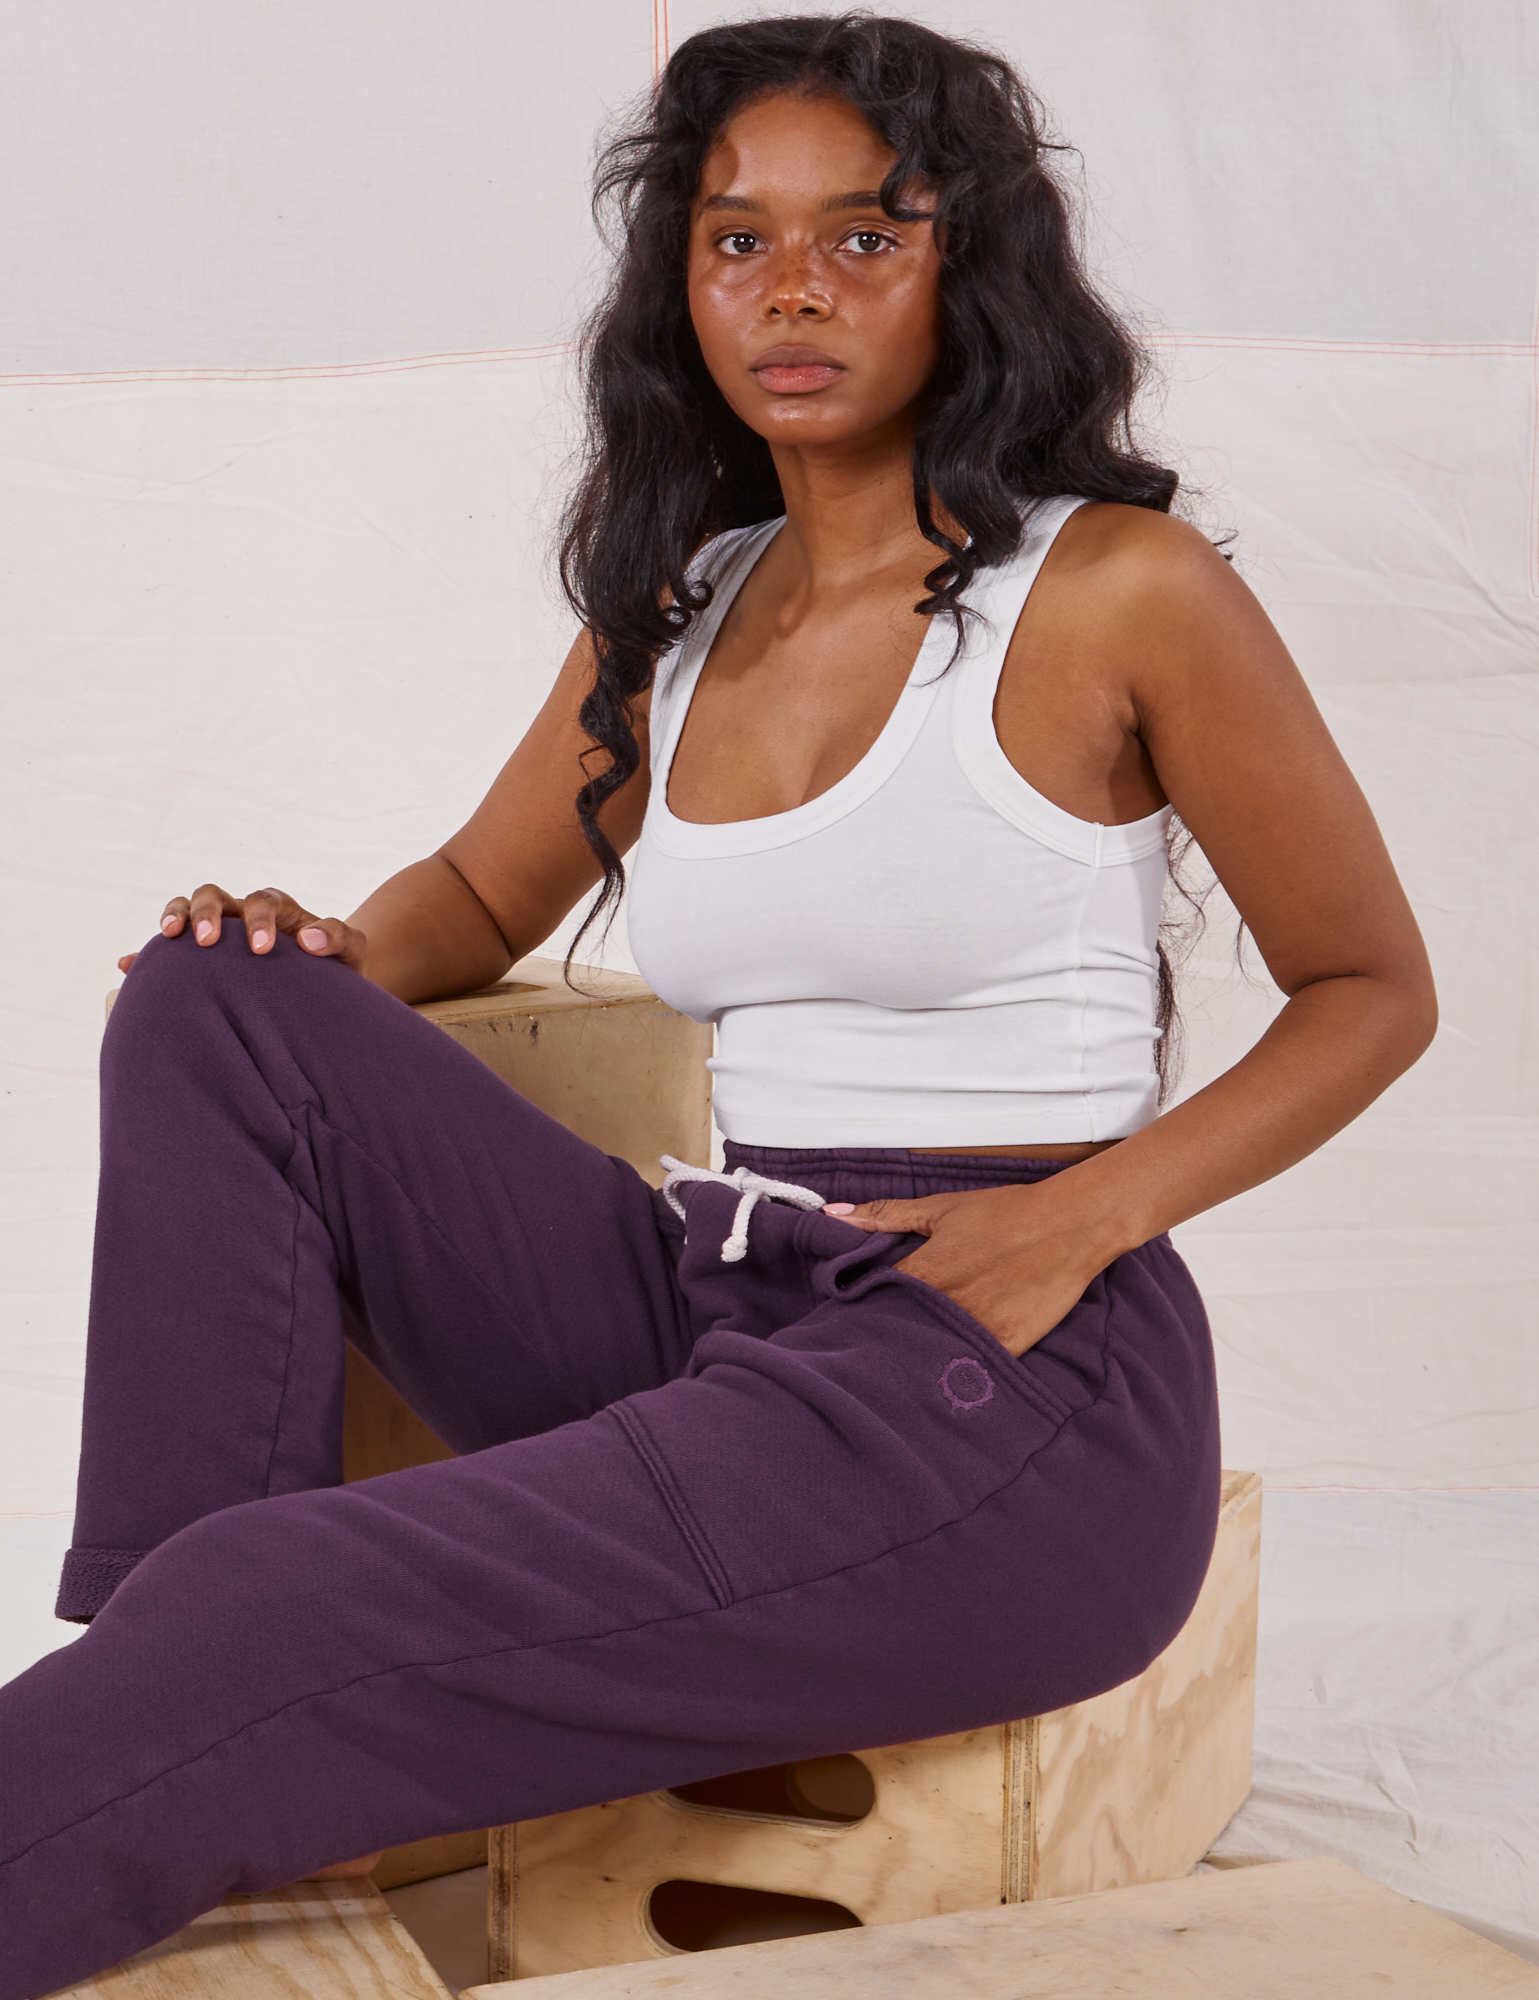 Kandia is wearing Rolled Cuff Sweat Pants in Nebula Purple and vintage off-white Cropped Tank Top